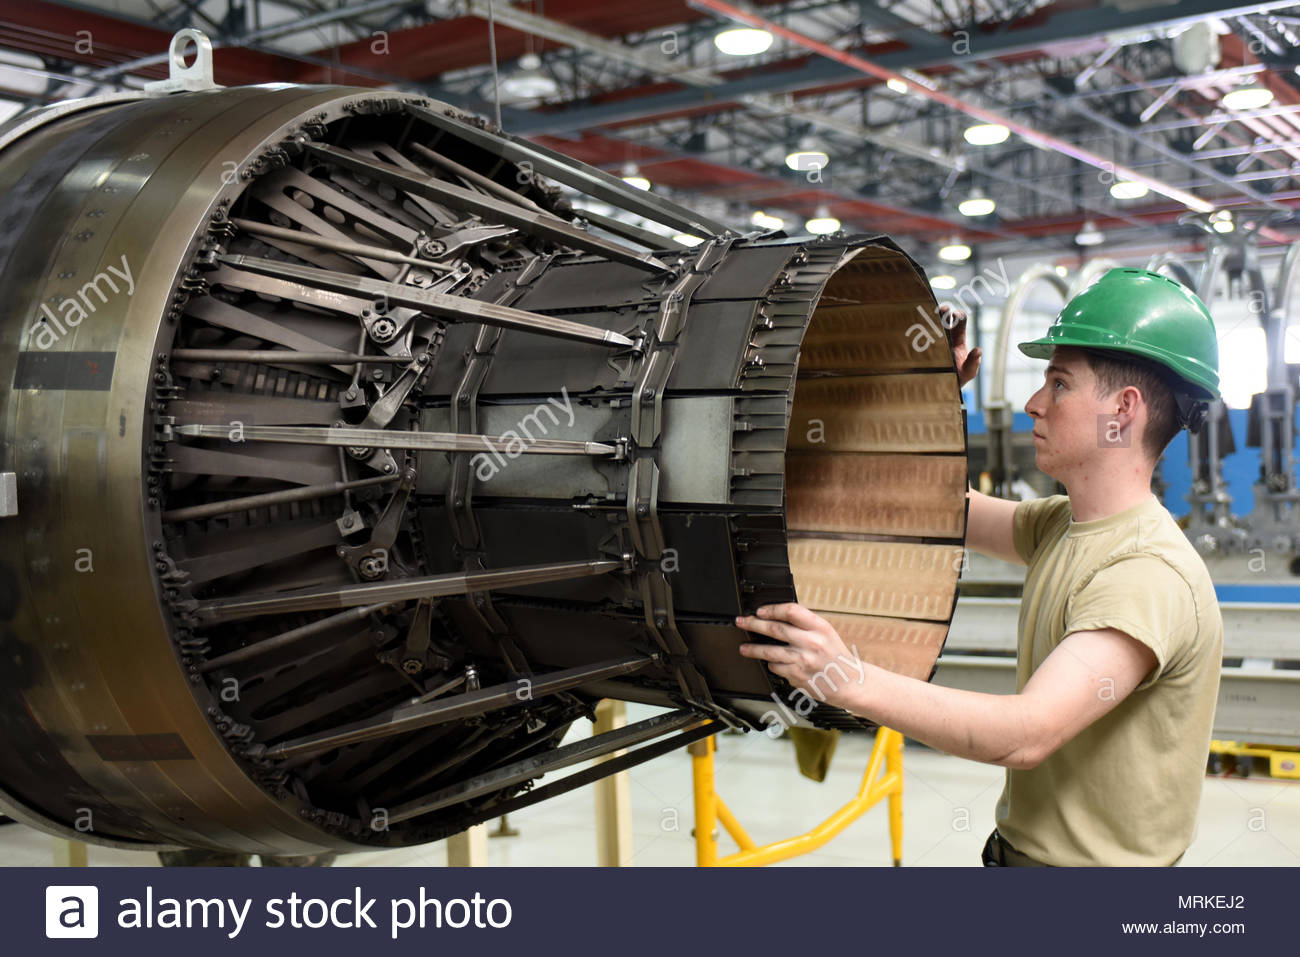 an-airman-assigned-to-the-48th-component-maintenance-squadron-maneuvers-an-f-15-engine-at-royal-air-force-lakenheath-england-june-13-the-48th-cms-is-responsible-for-the-installations-propulsions-shop-where-maintenance-is-performed-on-f-15-engines-us-air-force-photoairman-1st-class-eli-chevalier-MRKEJ2.jpg